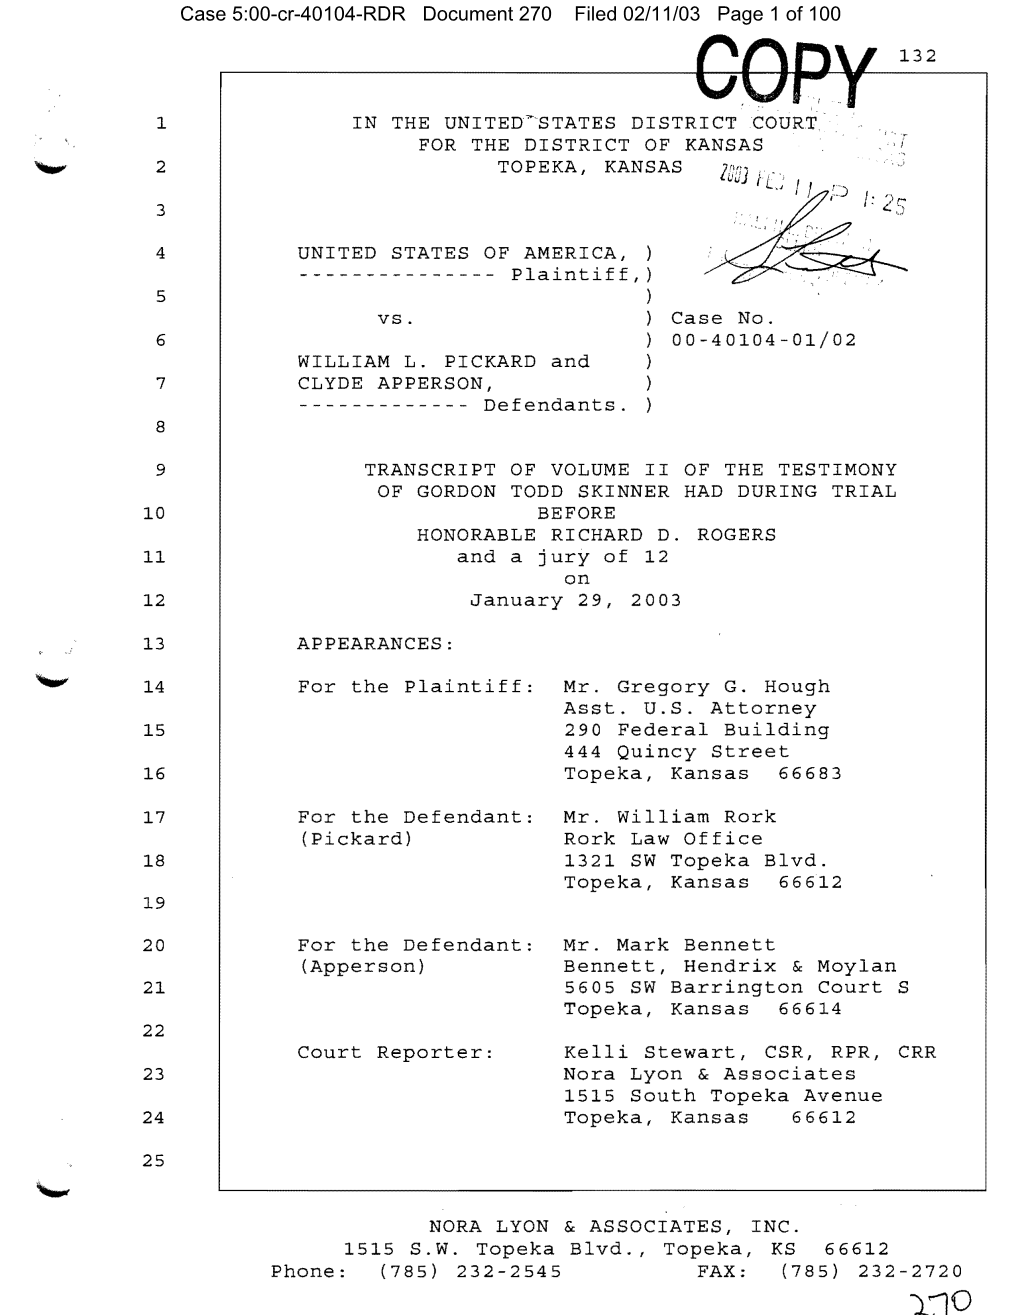 "L"10 Case 5:00-Cr-40104-RDR Document 270 Filed 02/11/03 Page 2 of 100